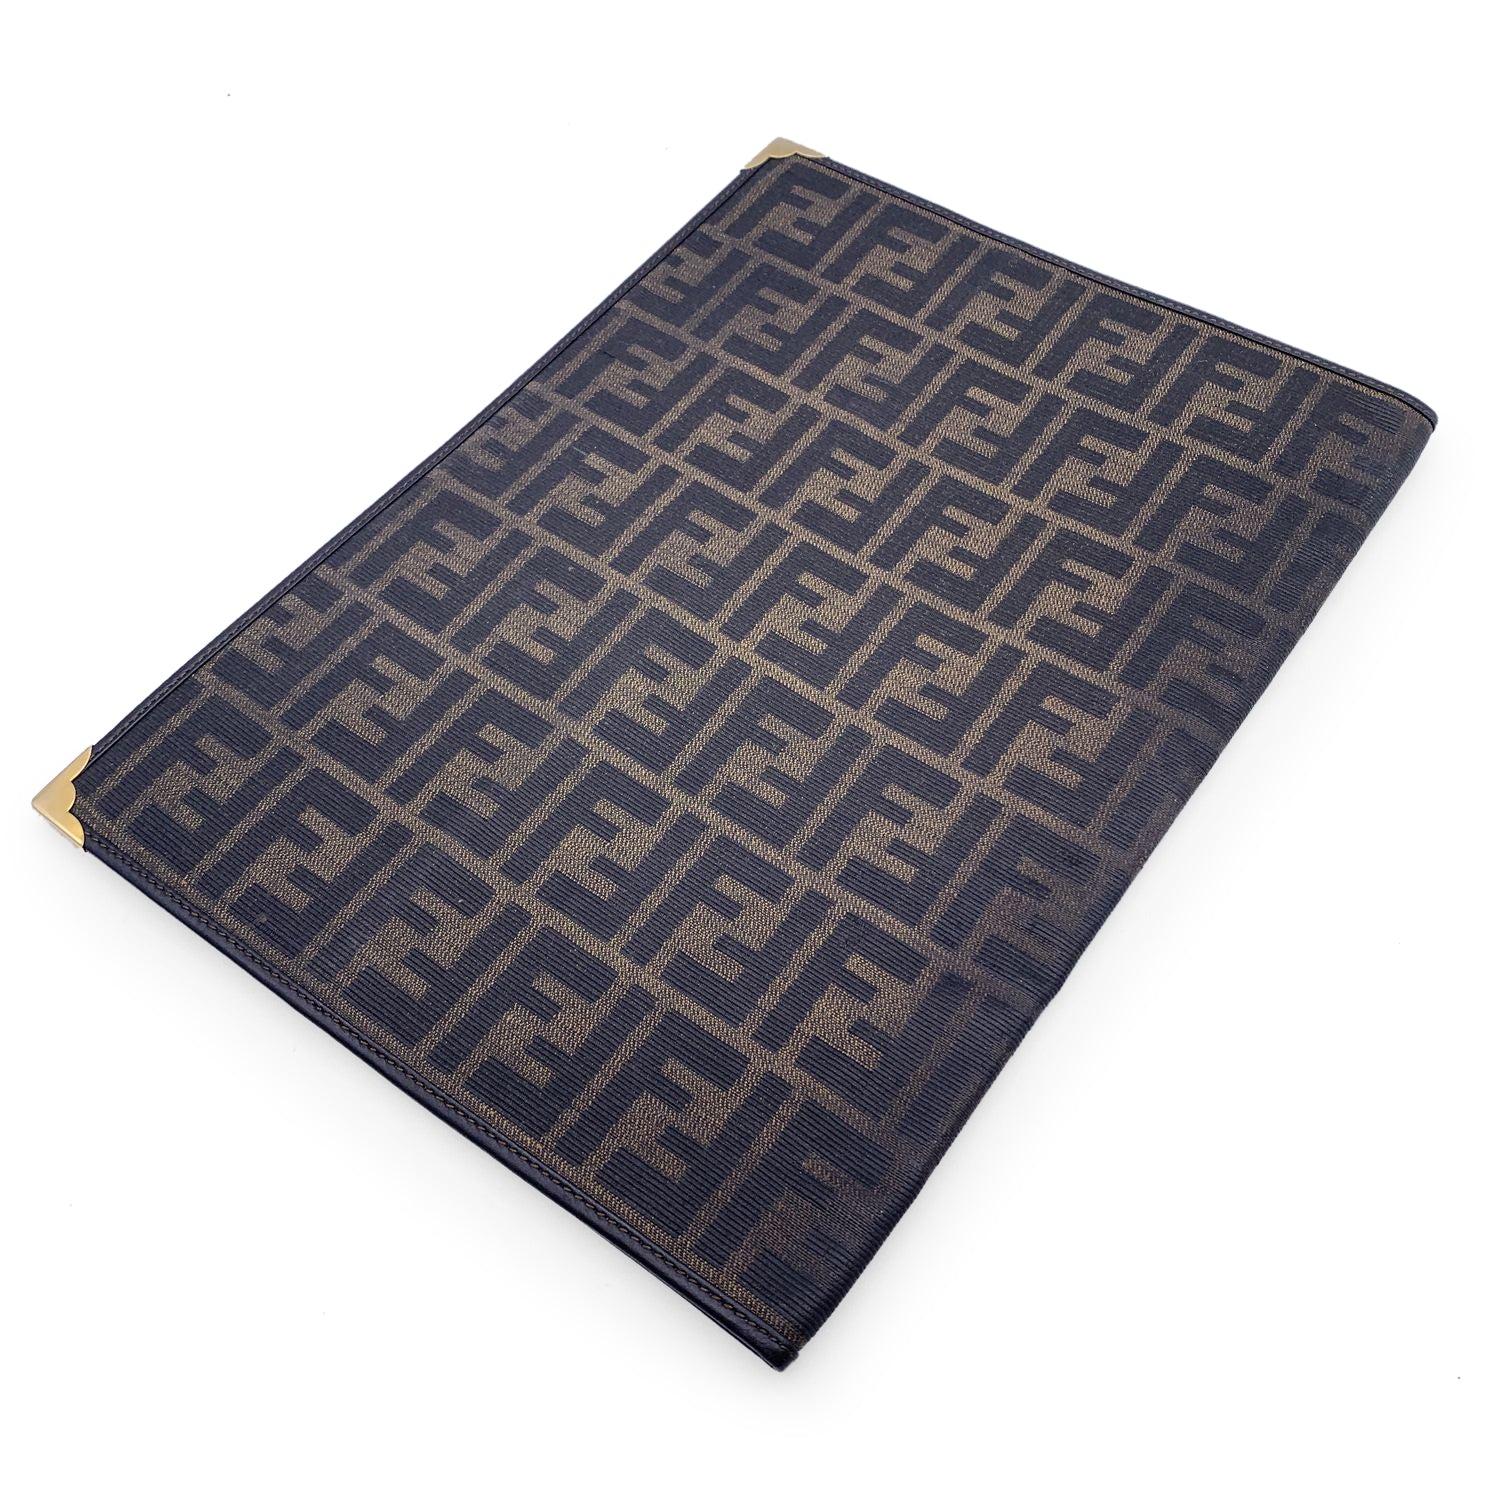 Fendi Vintage Zucca Monogram Canvas A4 Agenda Notebook Cover In Good Condition For Sale In Rome, Rome